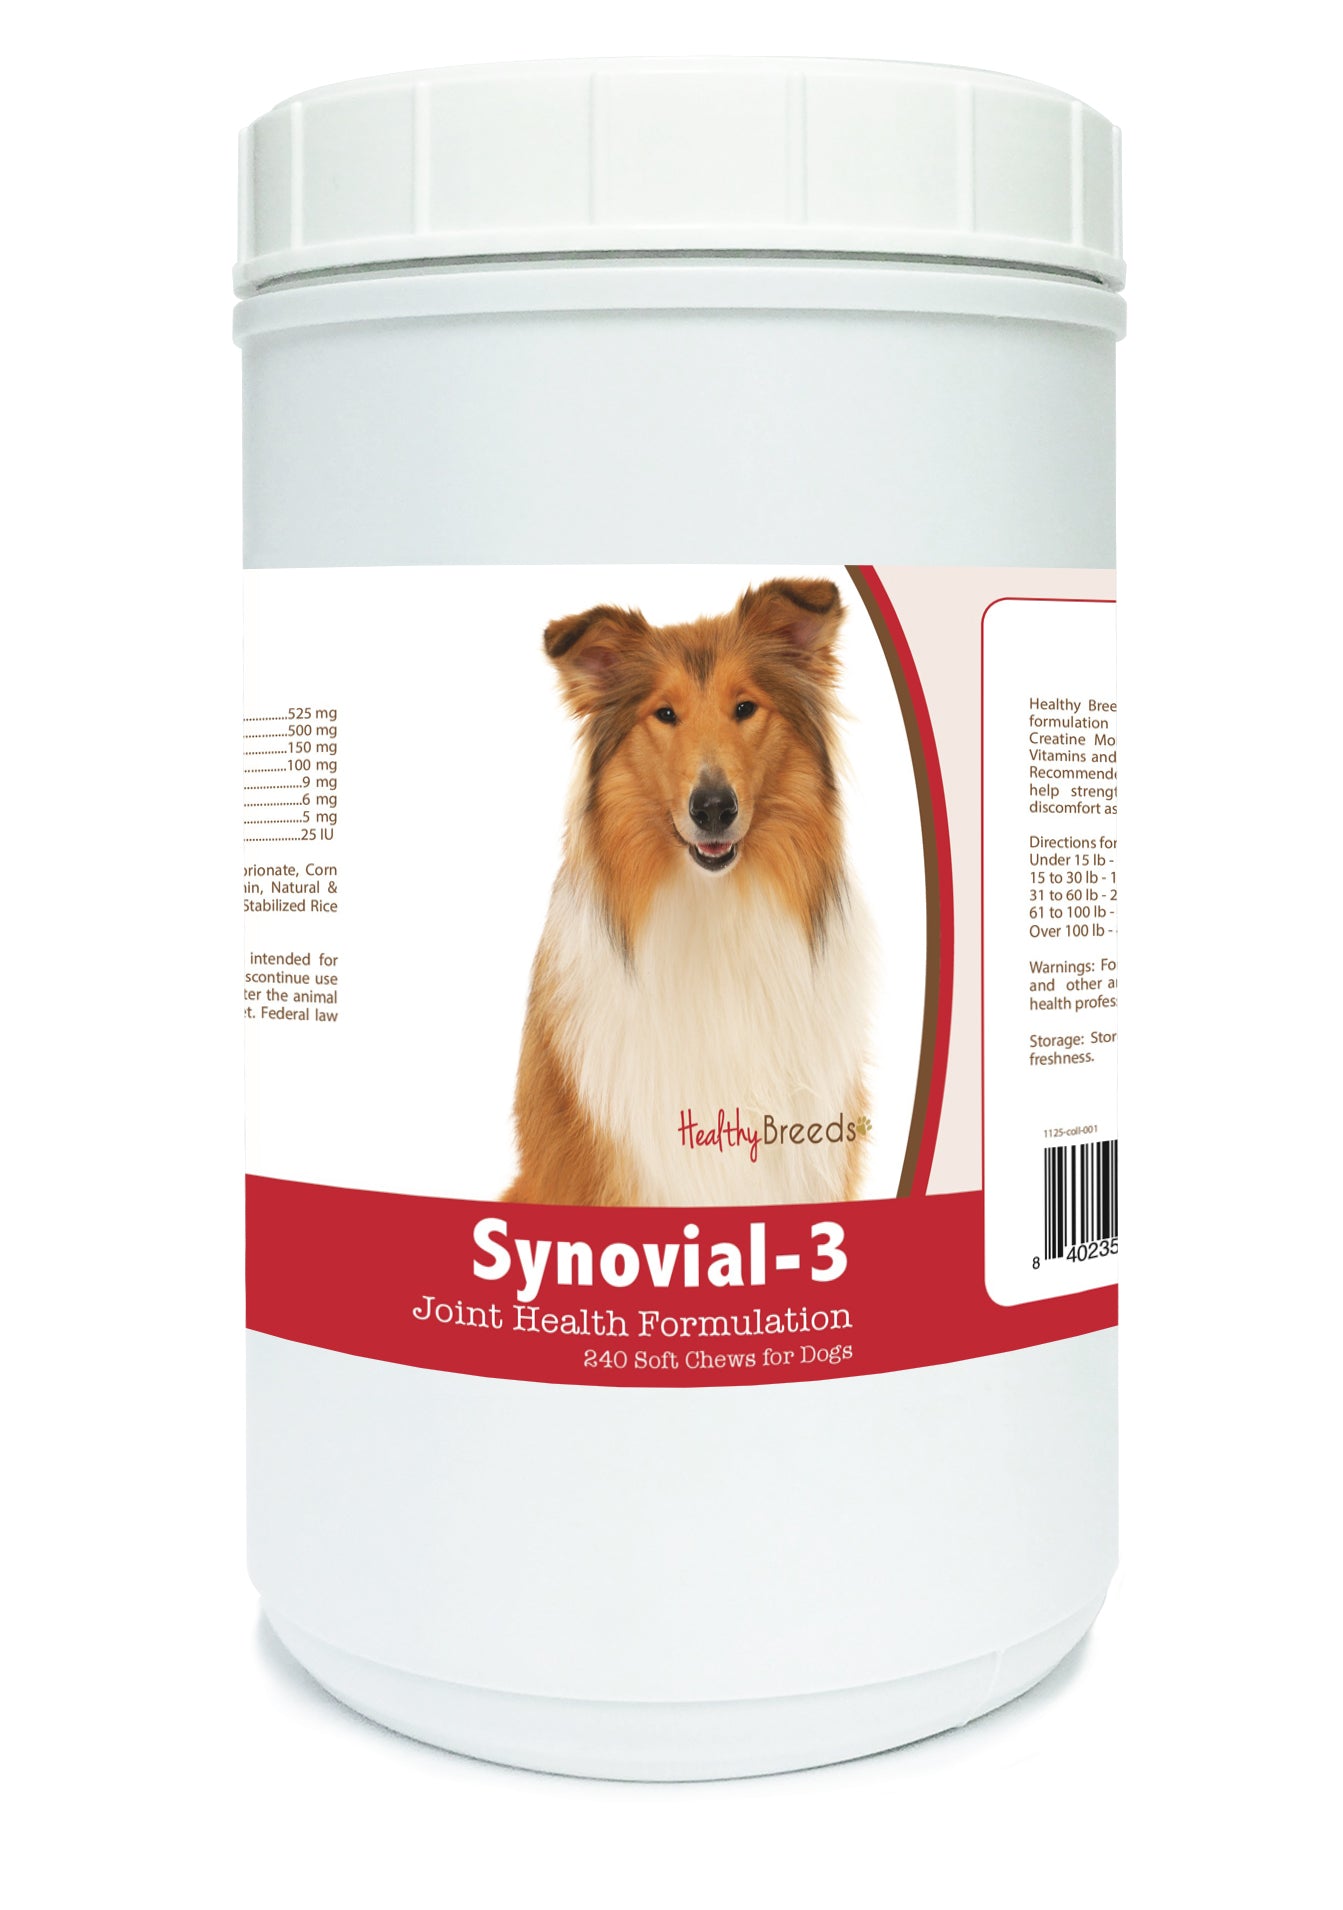 Collie Synovial-3 Joint Health Formulation Soft Chews 240 Count